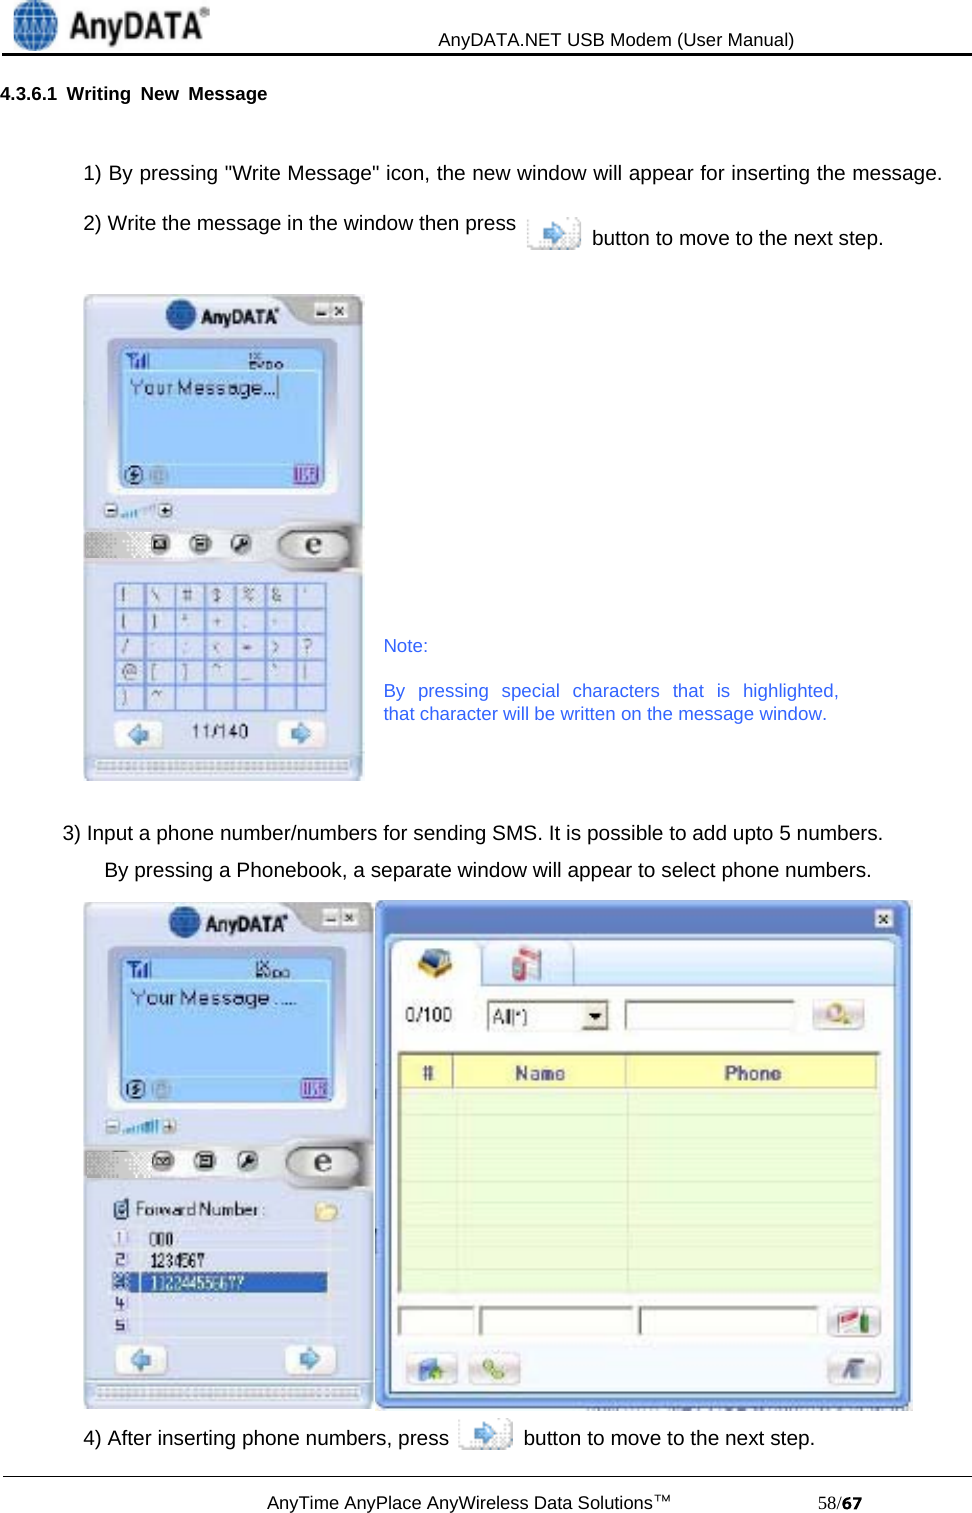                                             AnyDATA.NET USB Modem (User Manual)AnyTime AnyPlace AnyWireless Data Solutions™                            58/4.3.6.1 Writing New Message1) By pressing &quot;Write Message&quot; icon, the new window will appear for inserting the message.2) Write the message in the window then press   button to move to the next step.Note:By pressing special characters that is highlighted,that character will be written on the message window.3) Input a phone number/numbers for sending SMS. It is possible to add upto 5 numbers.By pressing a Phonebook, a separate window will appear to select phone numbers.4) After inserting phone numbers, press   button to move to the next step.